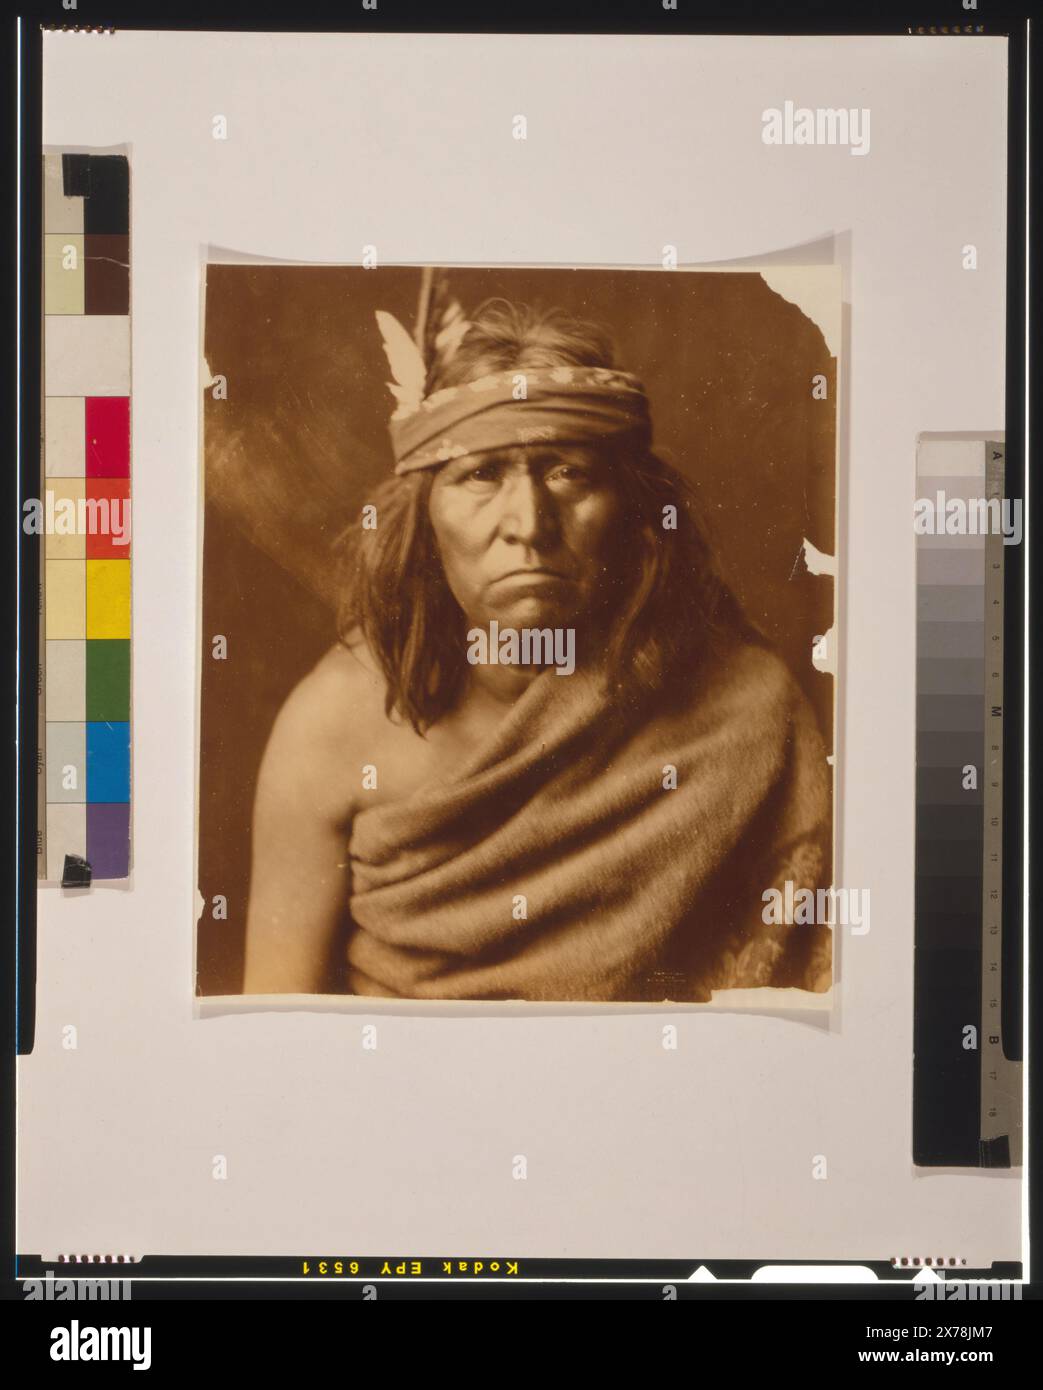 Gennetoa the Renegade Apache, Curtis no. 120., LC no. 12., Edward S. Curtis., Forms part of: Edward S. Curtis Collection ., Published in: The North American Indian / Edward S. Curtis. [Seattle, Wash.] : Edward S. Curtis, 1907-30, Suppl. v. 1, pl. 12.. Indians of North America, 1900-1910. , Apache Indians, 1900-1910. Stock Photo